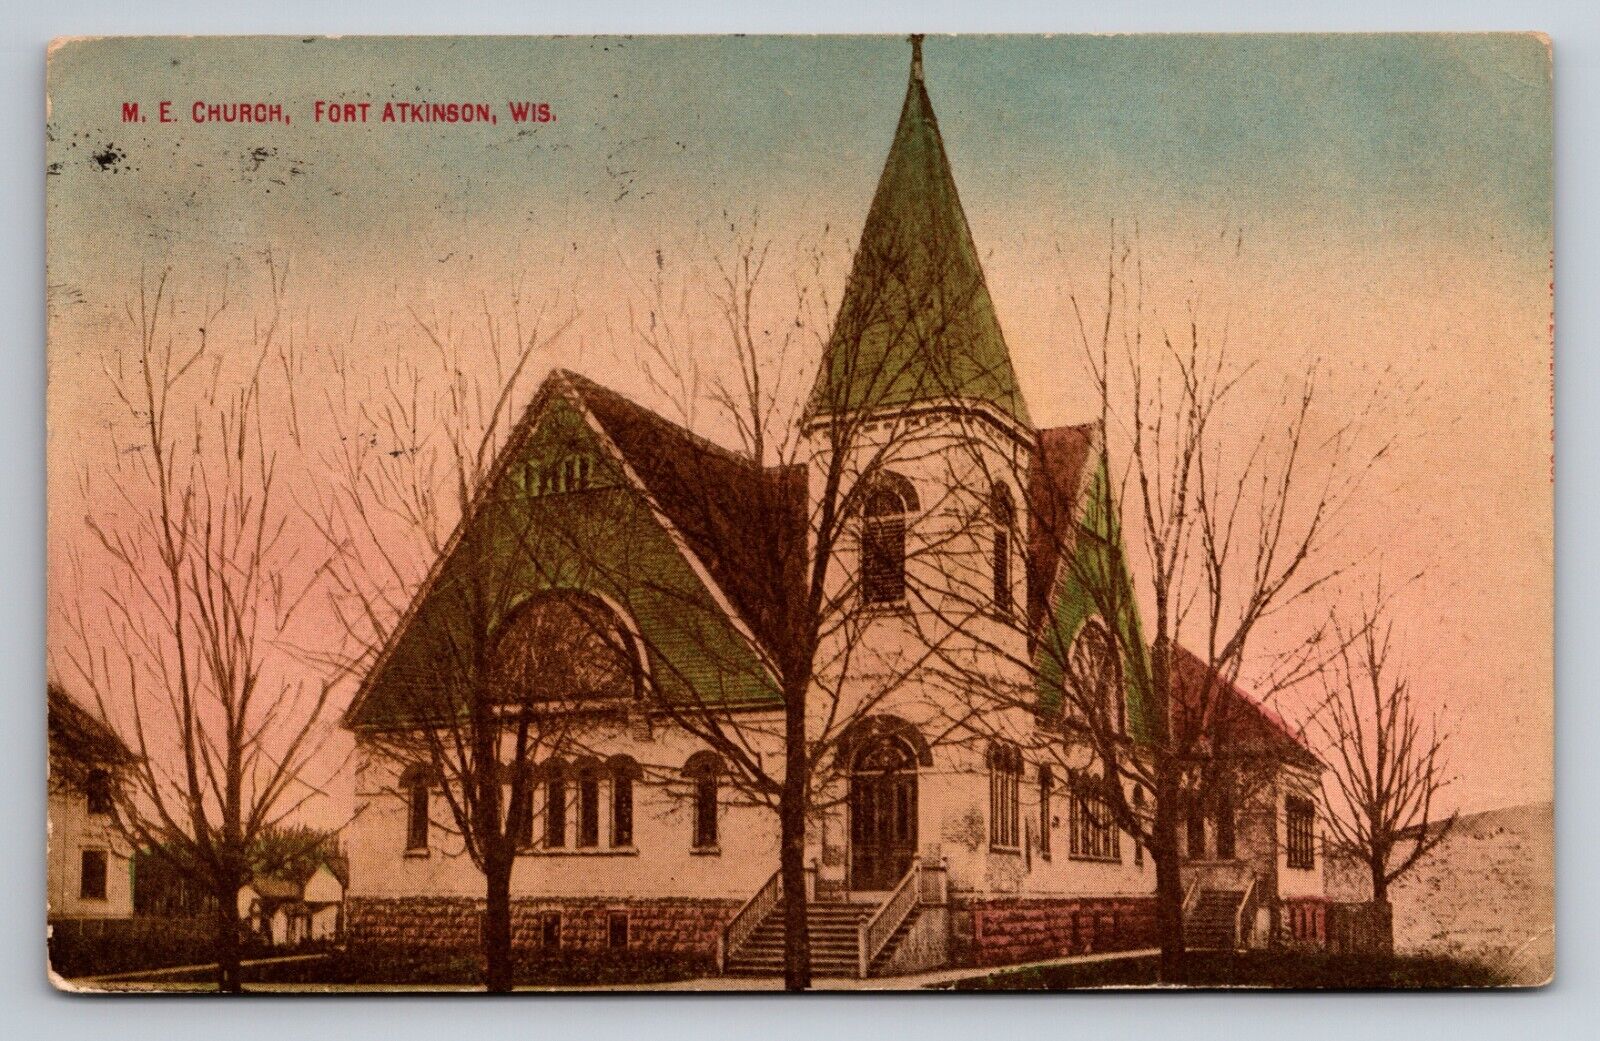 M. E. Church Fort Atkinson Wisconsin Vintage Posted Postcard